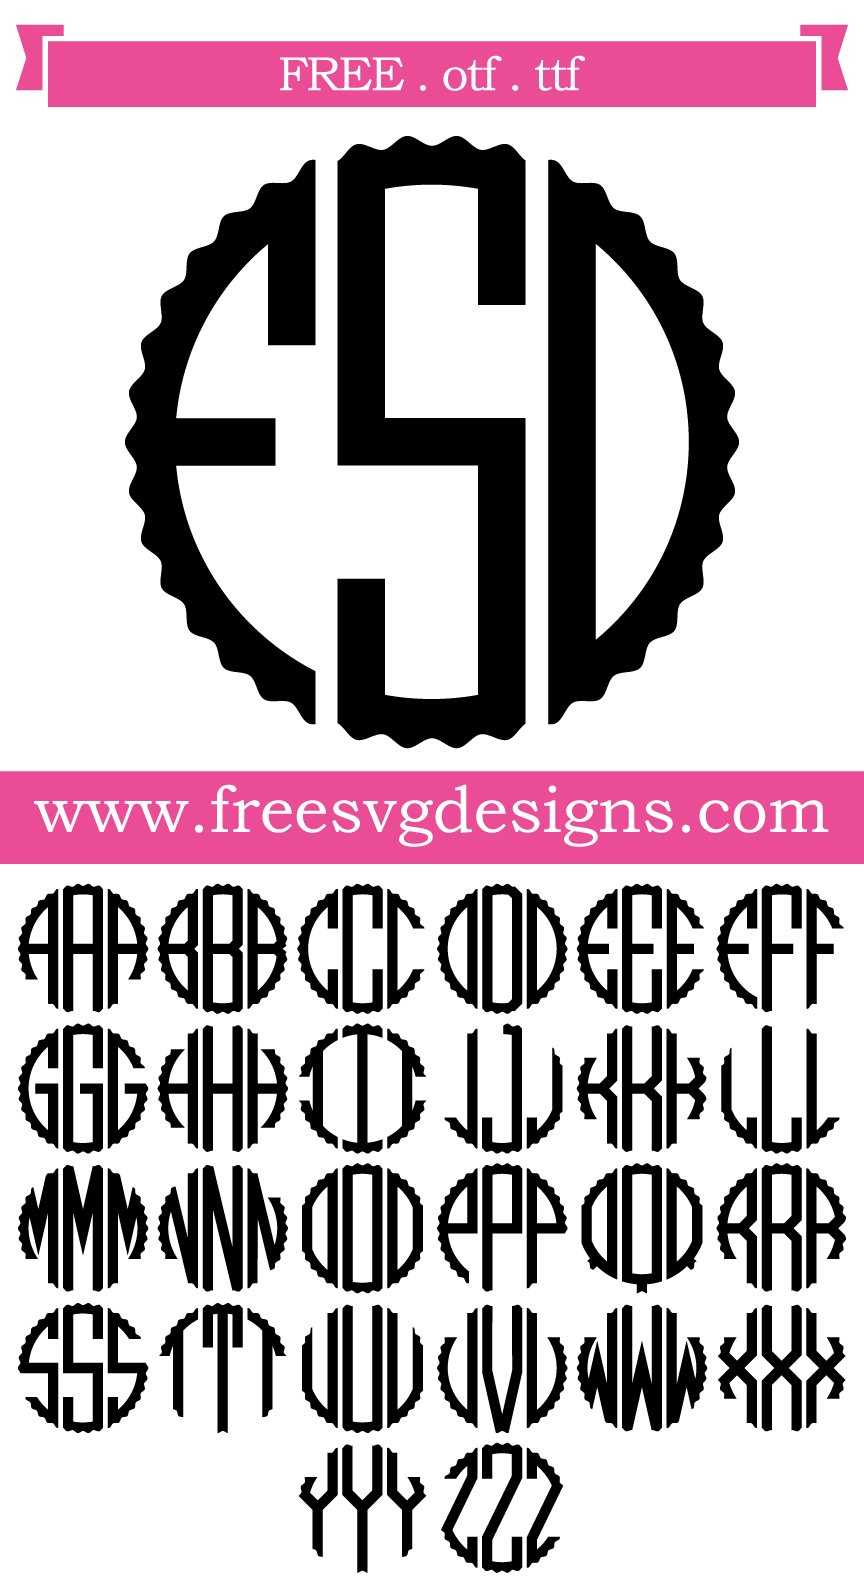 Free monogram font. This FREE download includes OTF and TTF files for personal cutting projects. Free vector / free svg monogram / free svg images for cricut